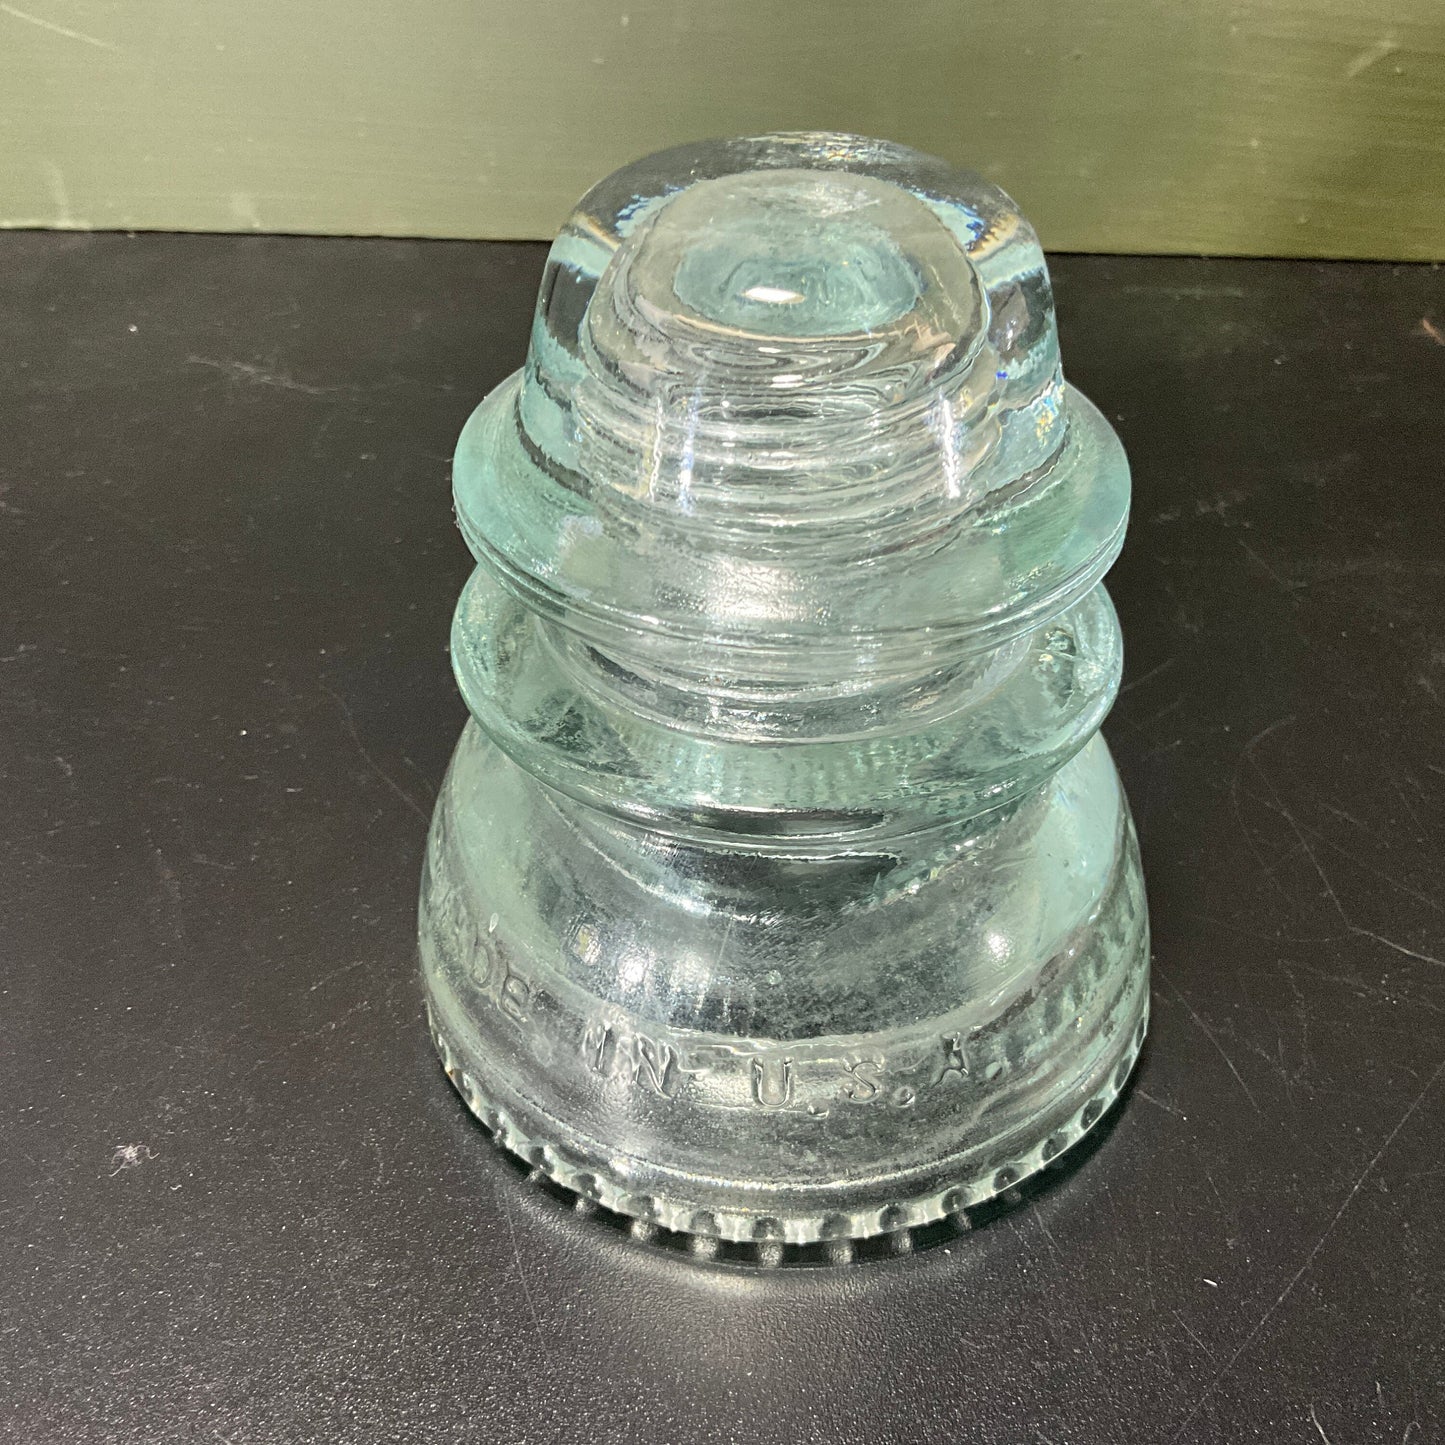 Crystal clear electric line pole insulator made in Hemingway AZ USA vintage collectible*